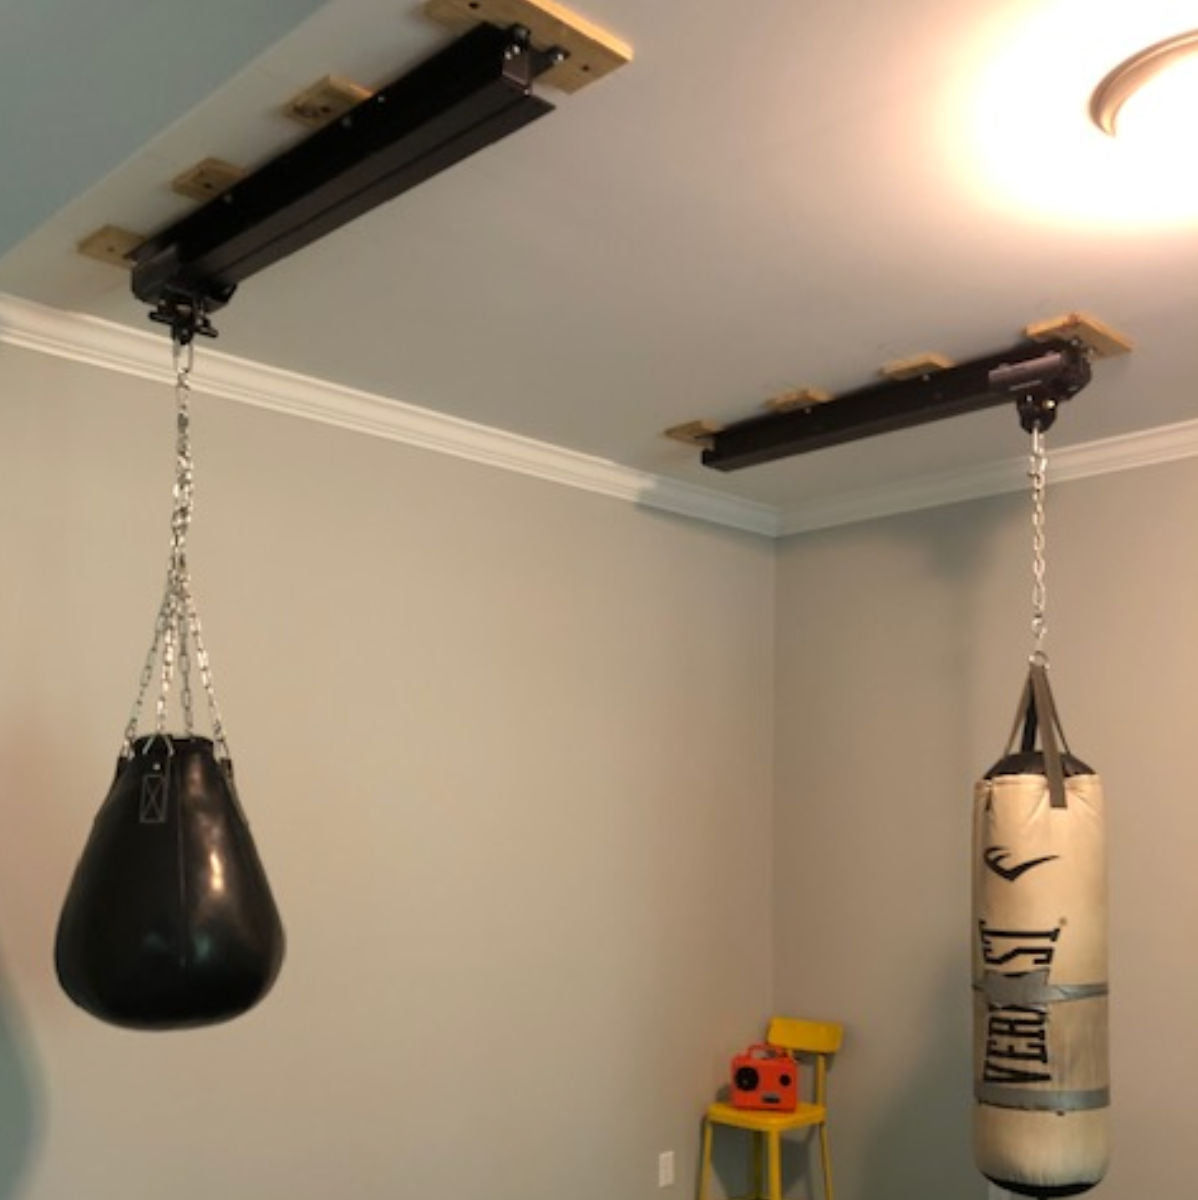 Everlast Wooden Beam Heavy Bag Hanger | Free Curbside Pick Up at DICK'S